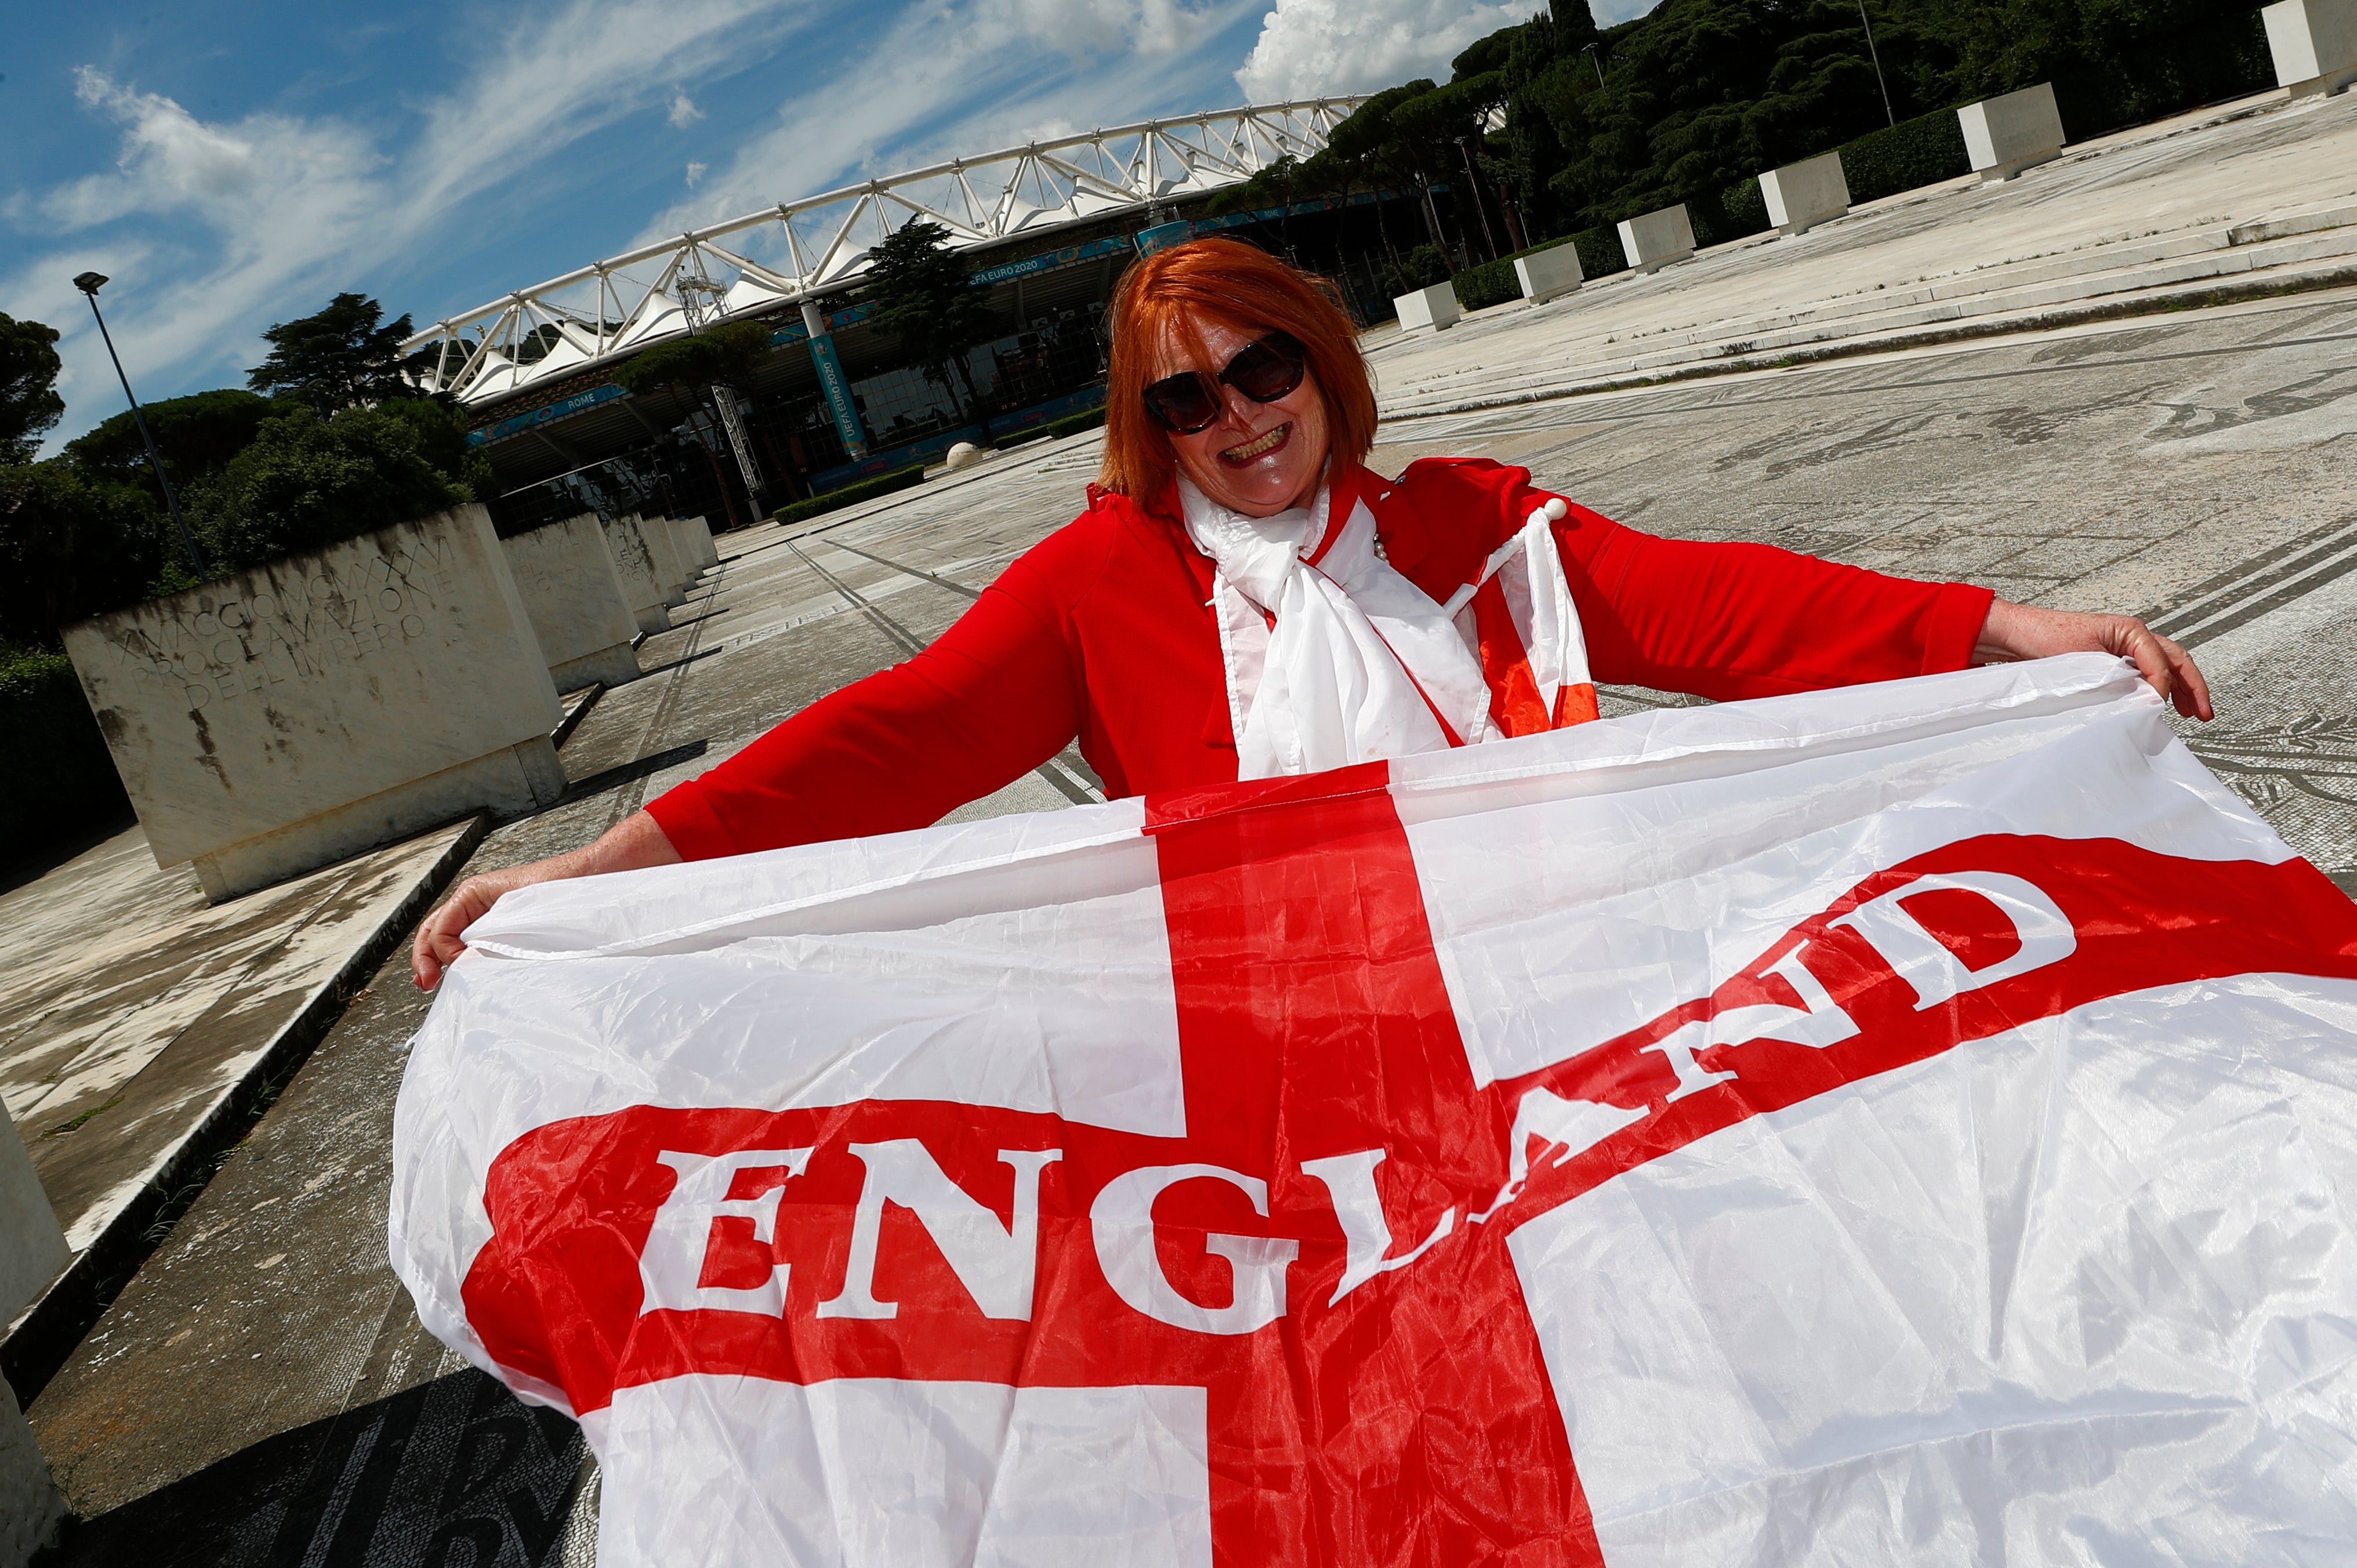 England soccer fan Dawn Hughes, who lives and works in Italy, poses for a photograph before the Euro 2020 quarter final against Ukraine, outside Stadio Olimpico in Rome